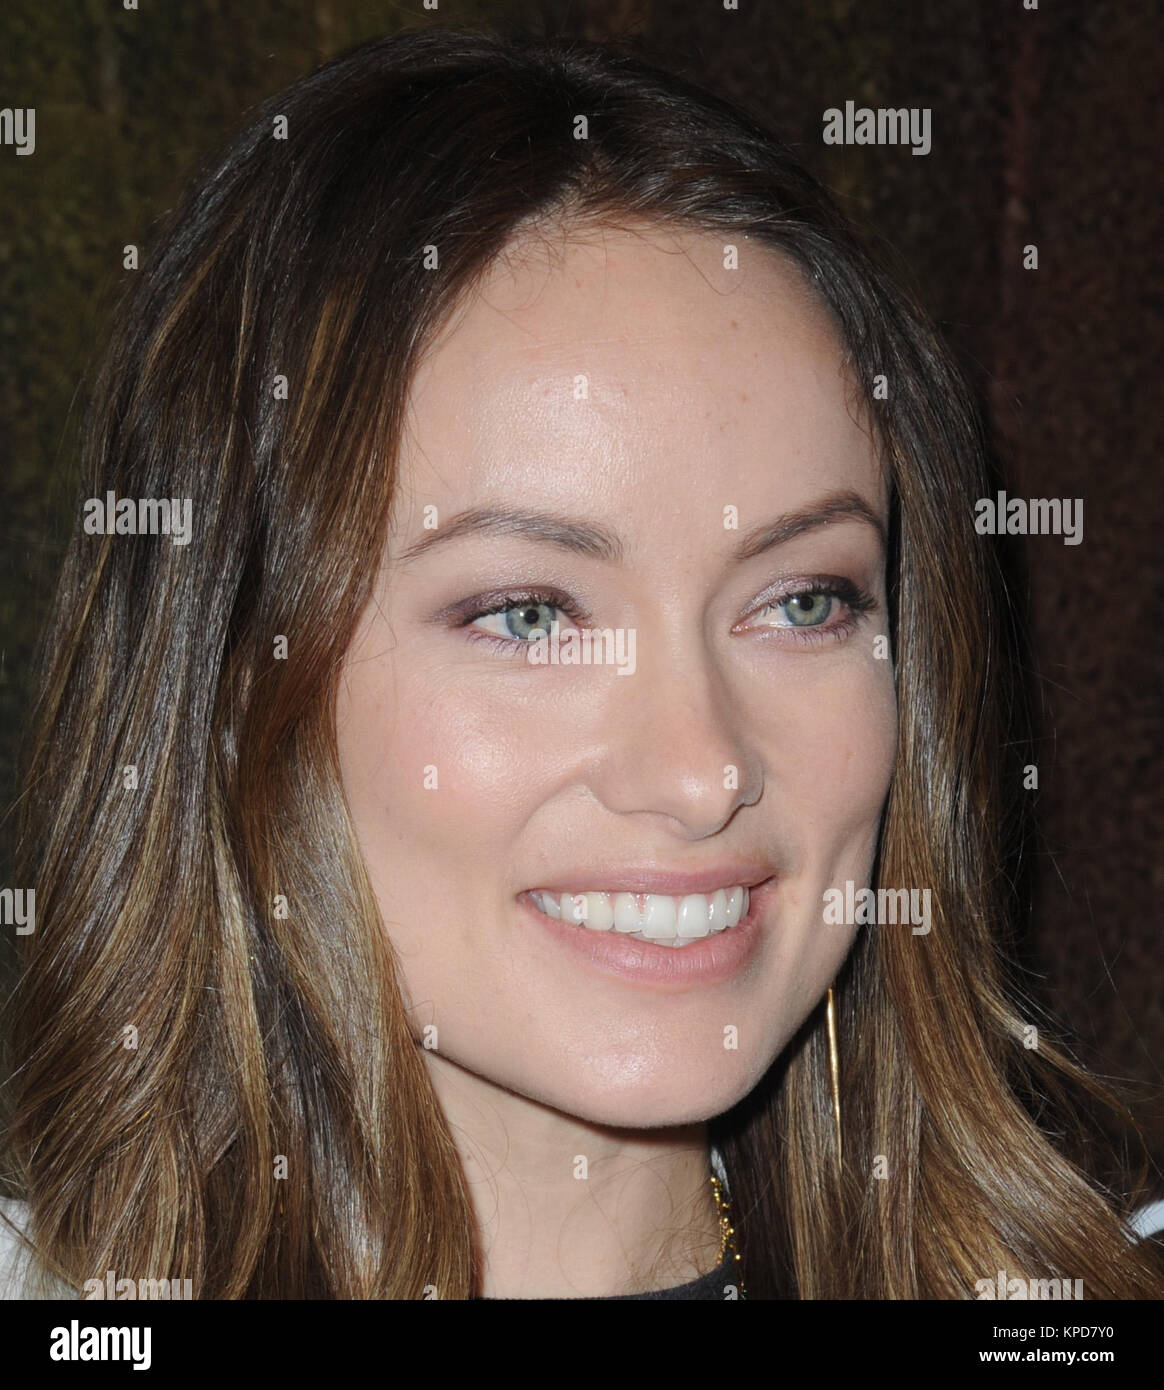 NEW YORK, NY - APRIL 14: Actress/Founder of Conscious Commerce Olivia Wilde  attends the H&M, Olivia Wilde, and Conscious Commerce celebration of the  opening of The Conscious Pop-Up Shop on April 14,